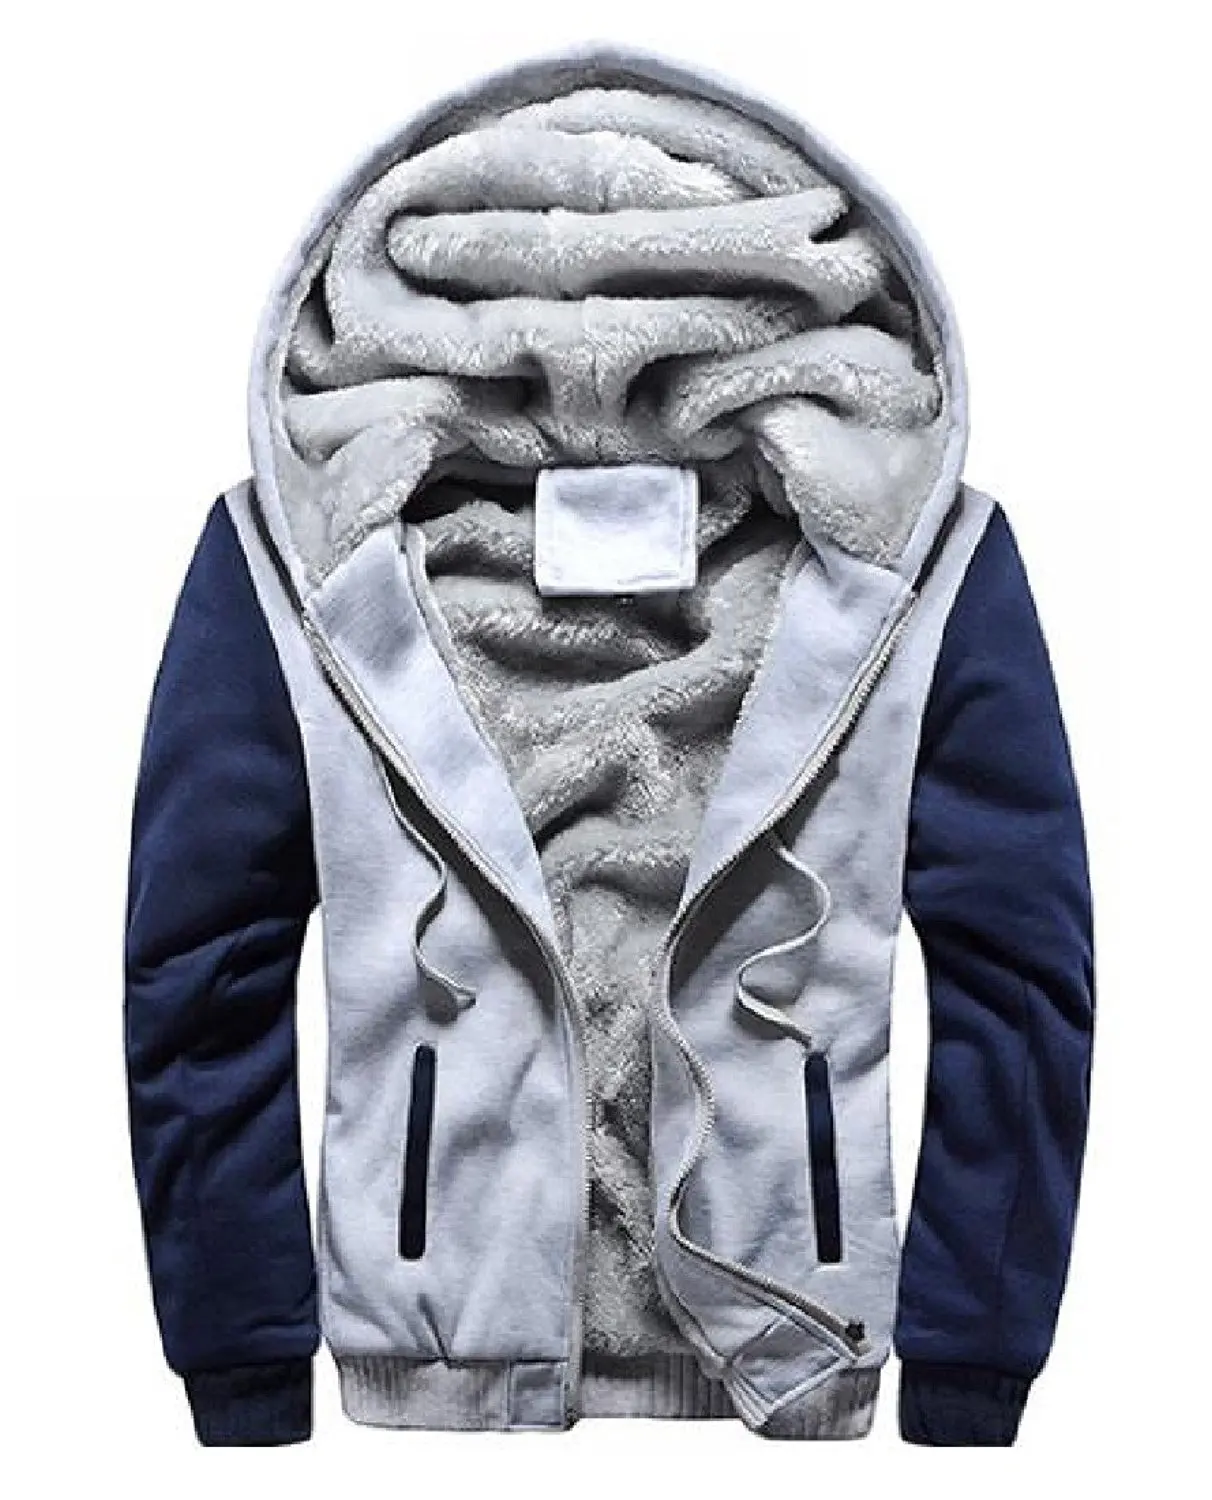 Cheap Baggy Hoodies, find Baggy Hoodies deals on line at Alibaba.com